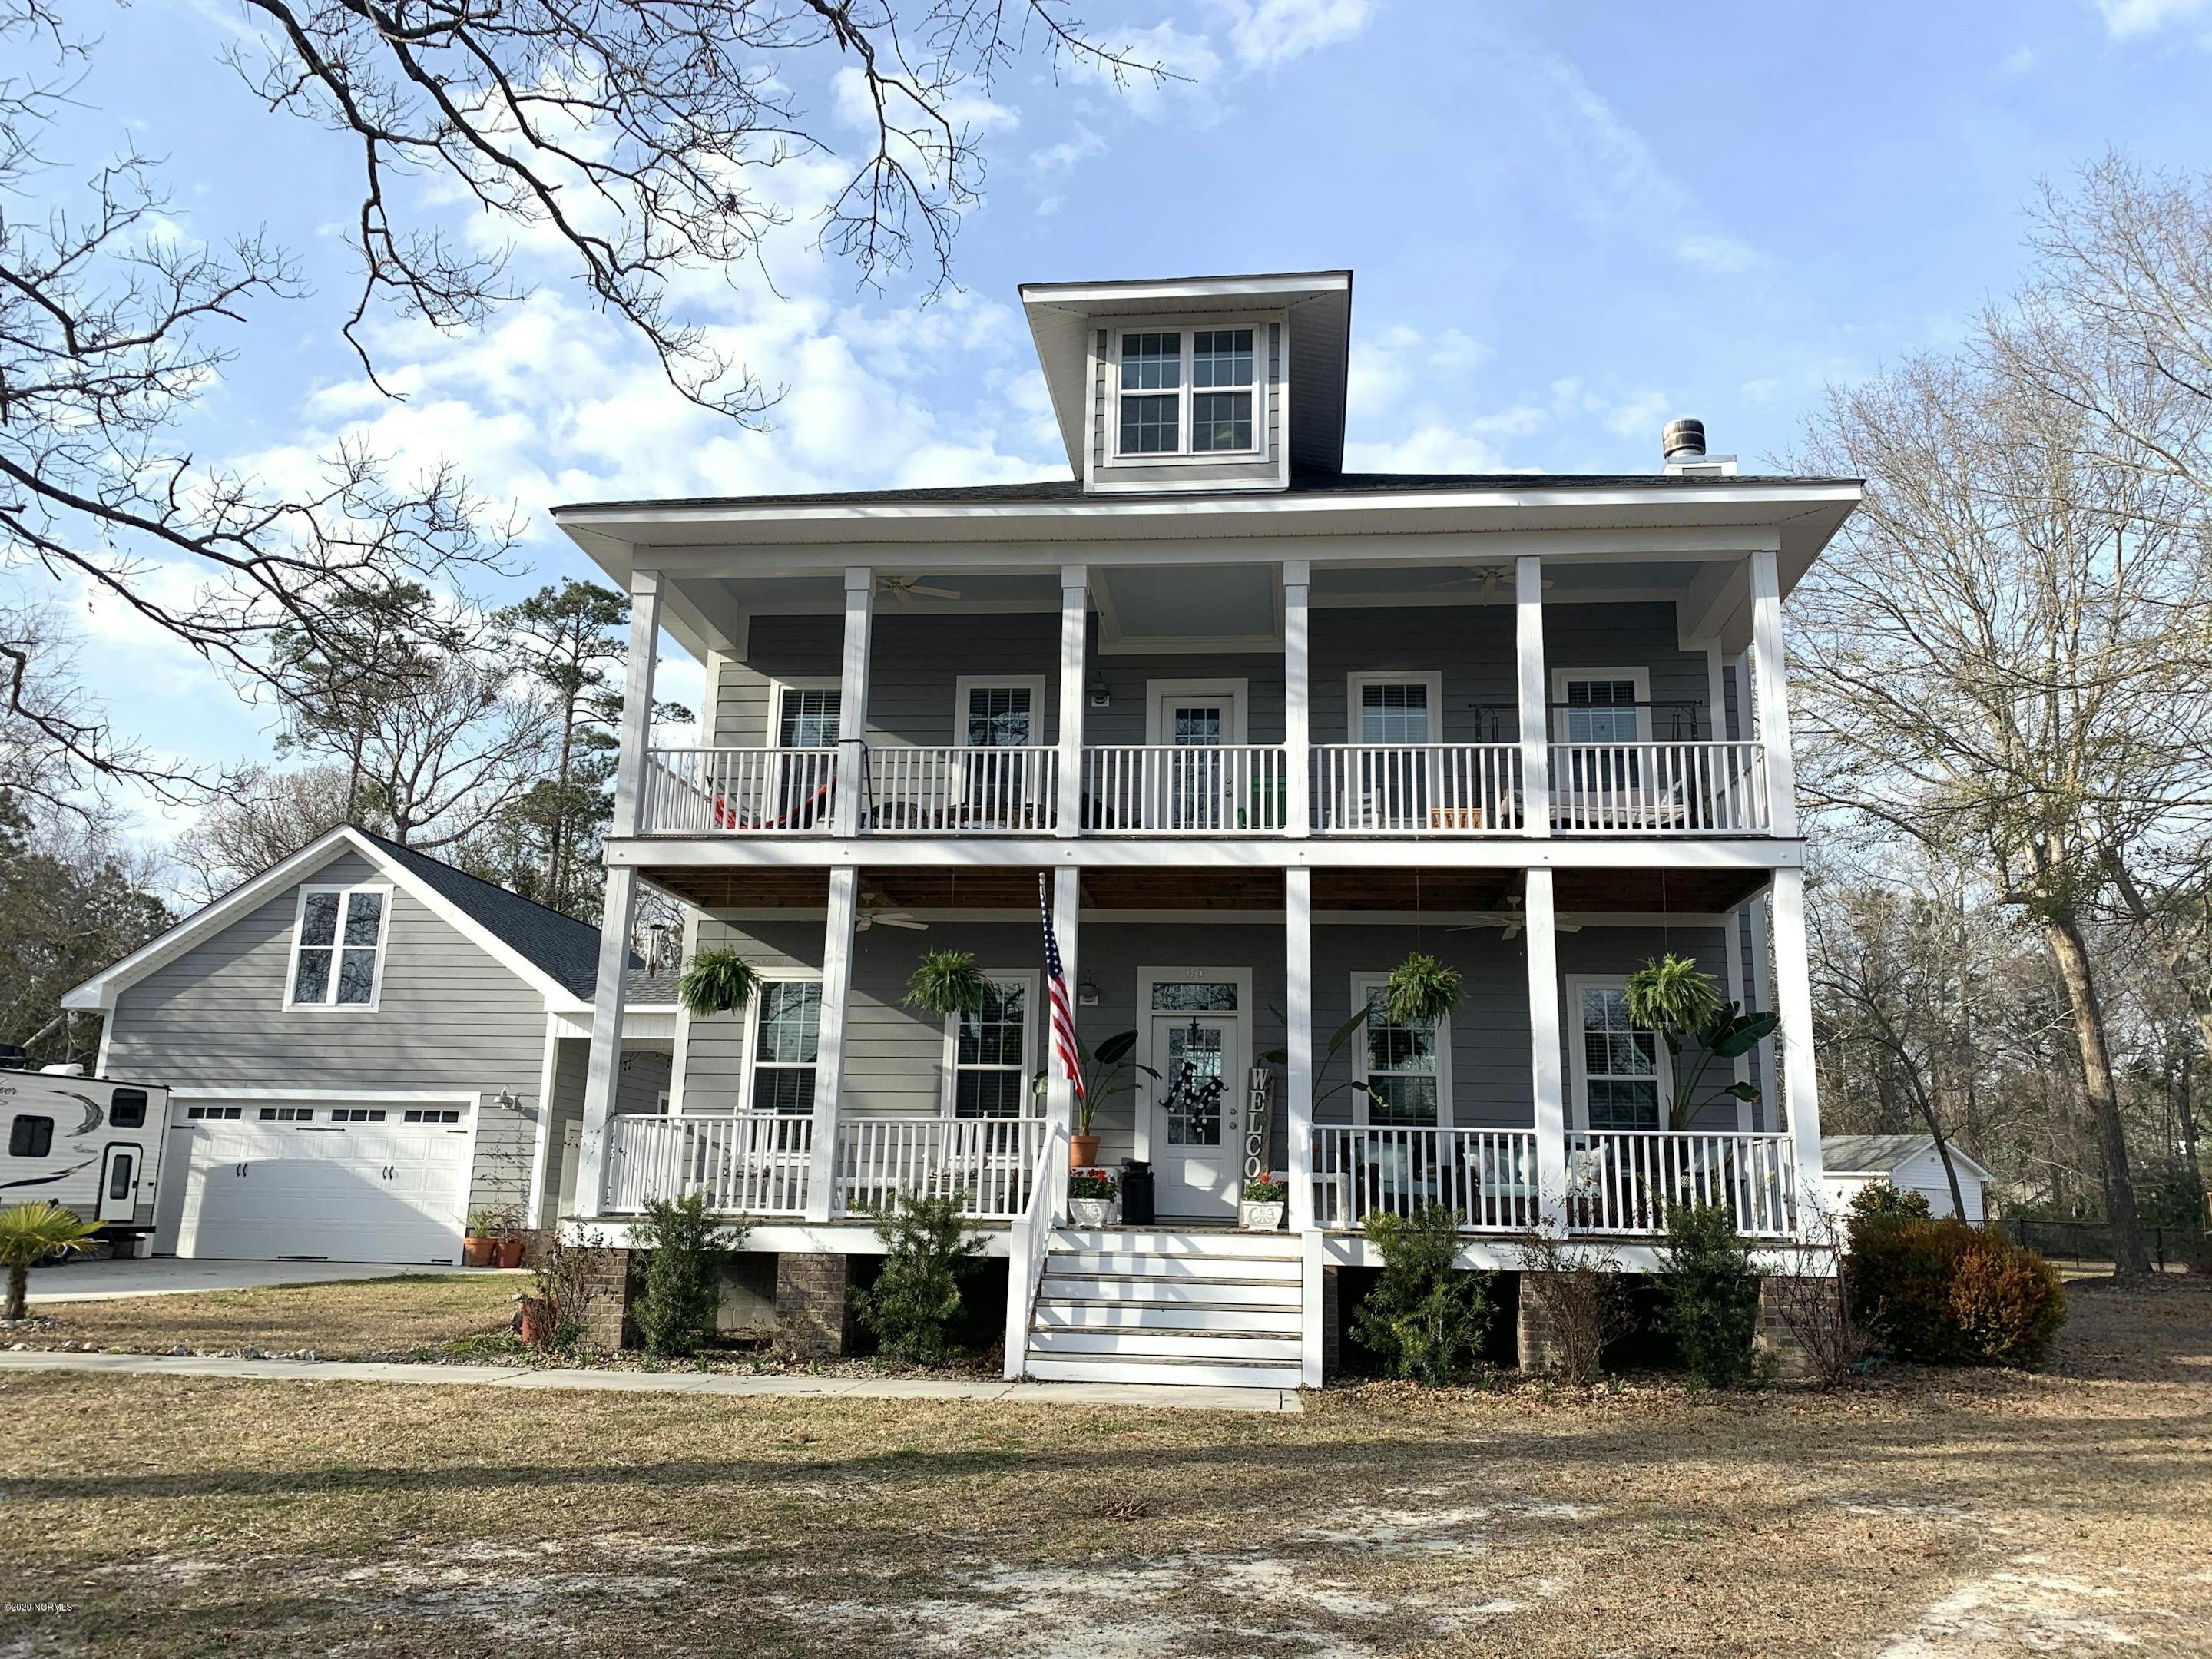 Looking for Southern Charm?